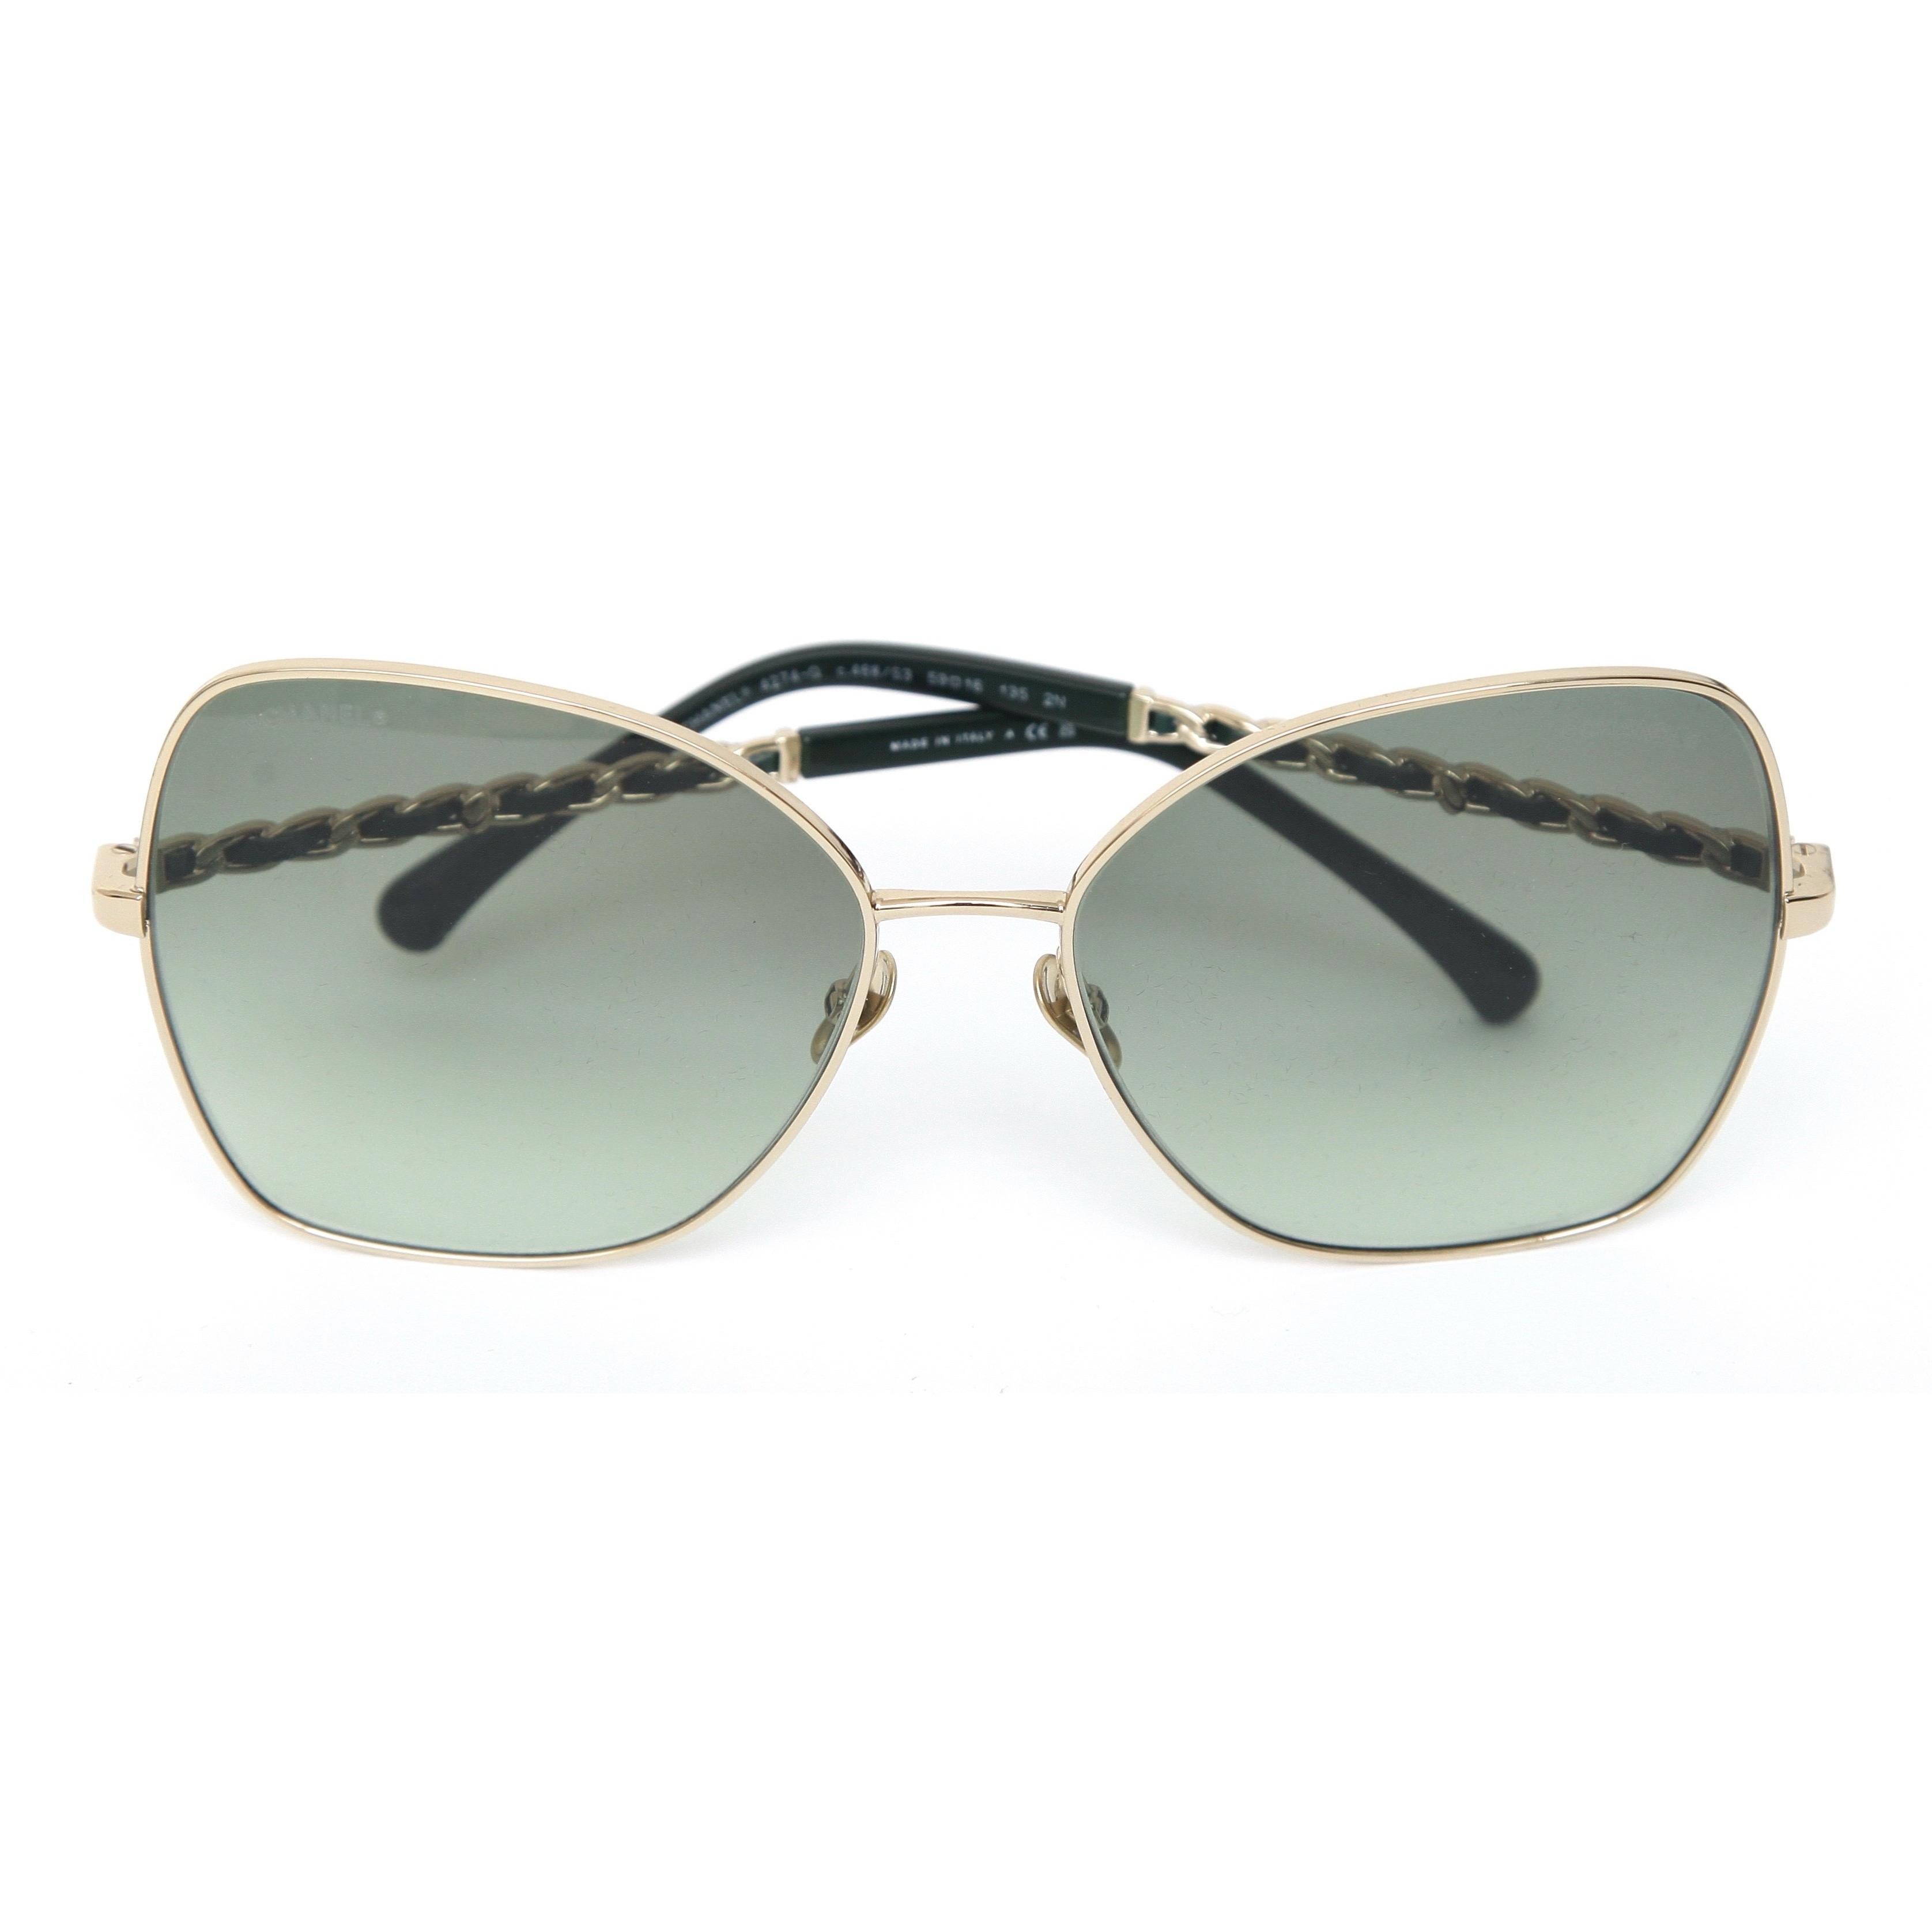 GUARANTEED AUTHENTIC CHANEL 2022 COLLECTION GREEN BUTTERFLY SUNGLASSES

4274-Q c.468/S3 59-16 135 2N
It is noted, the purchase includes strictly what is shown in the listing.
The removable leather-chain and leather chain case are Not